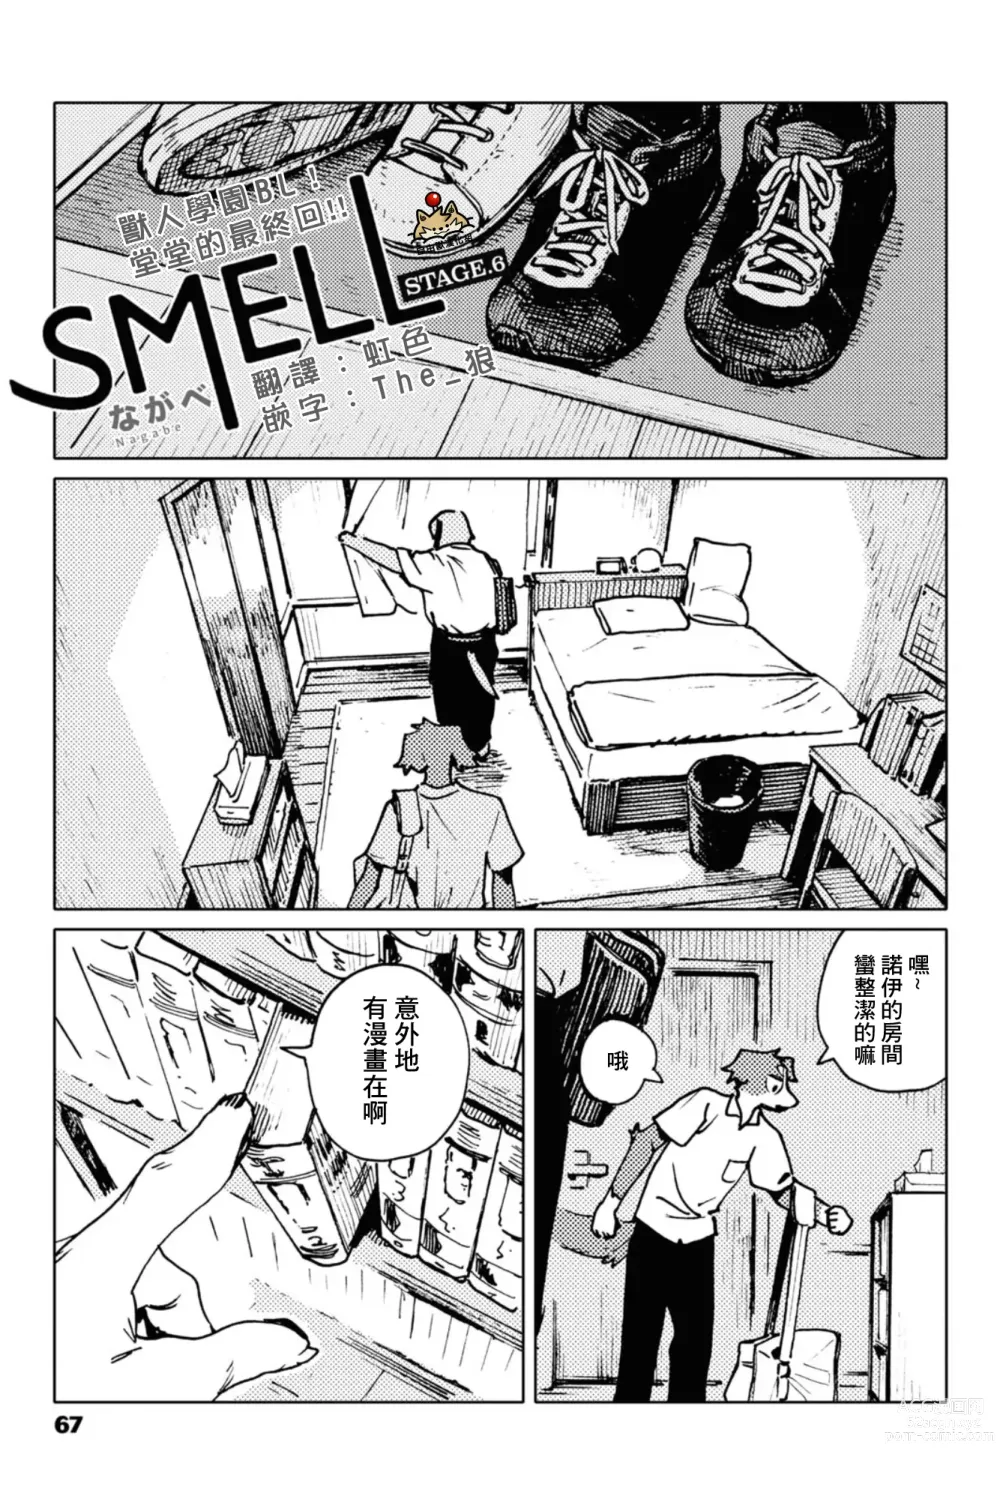 Page 1 of doujinshi Smell Stage.6